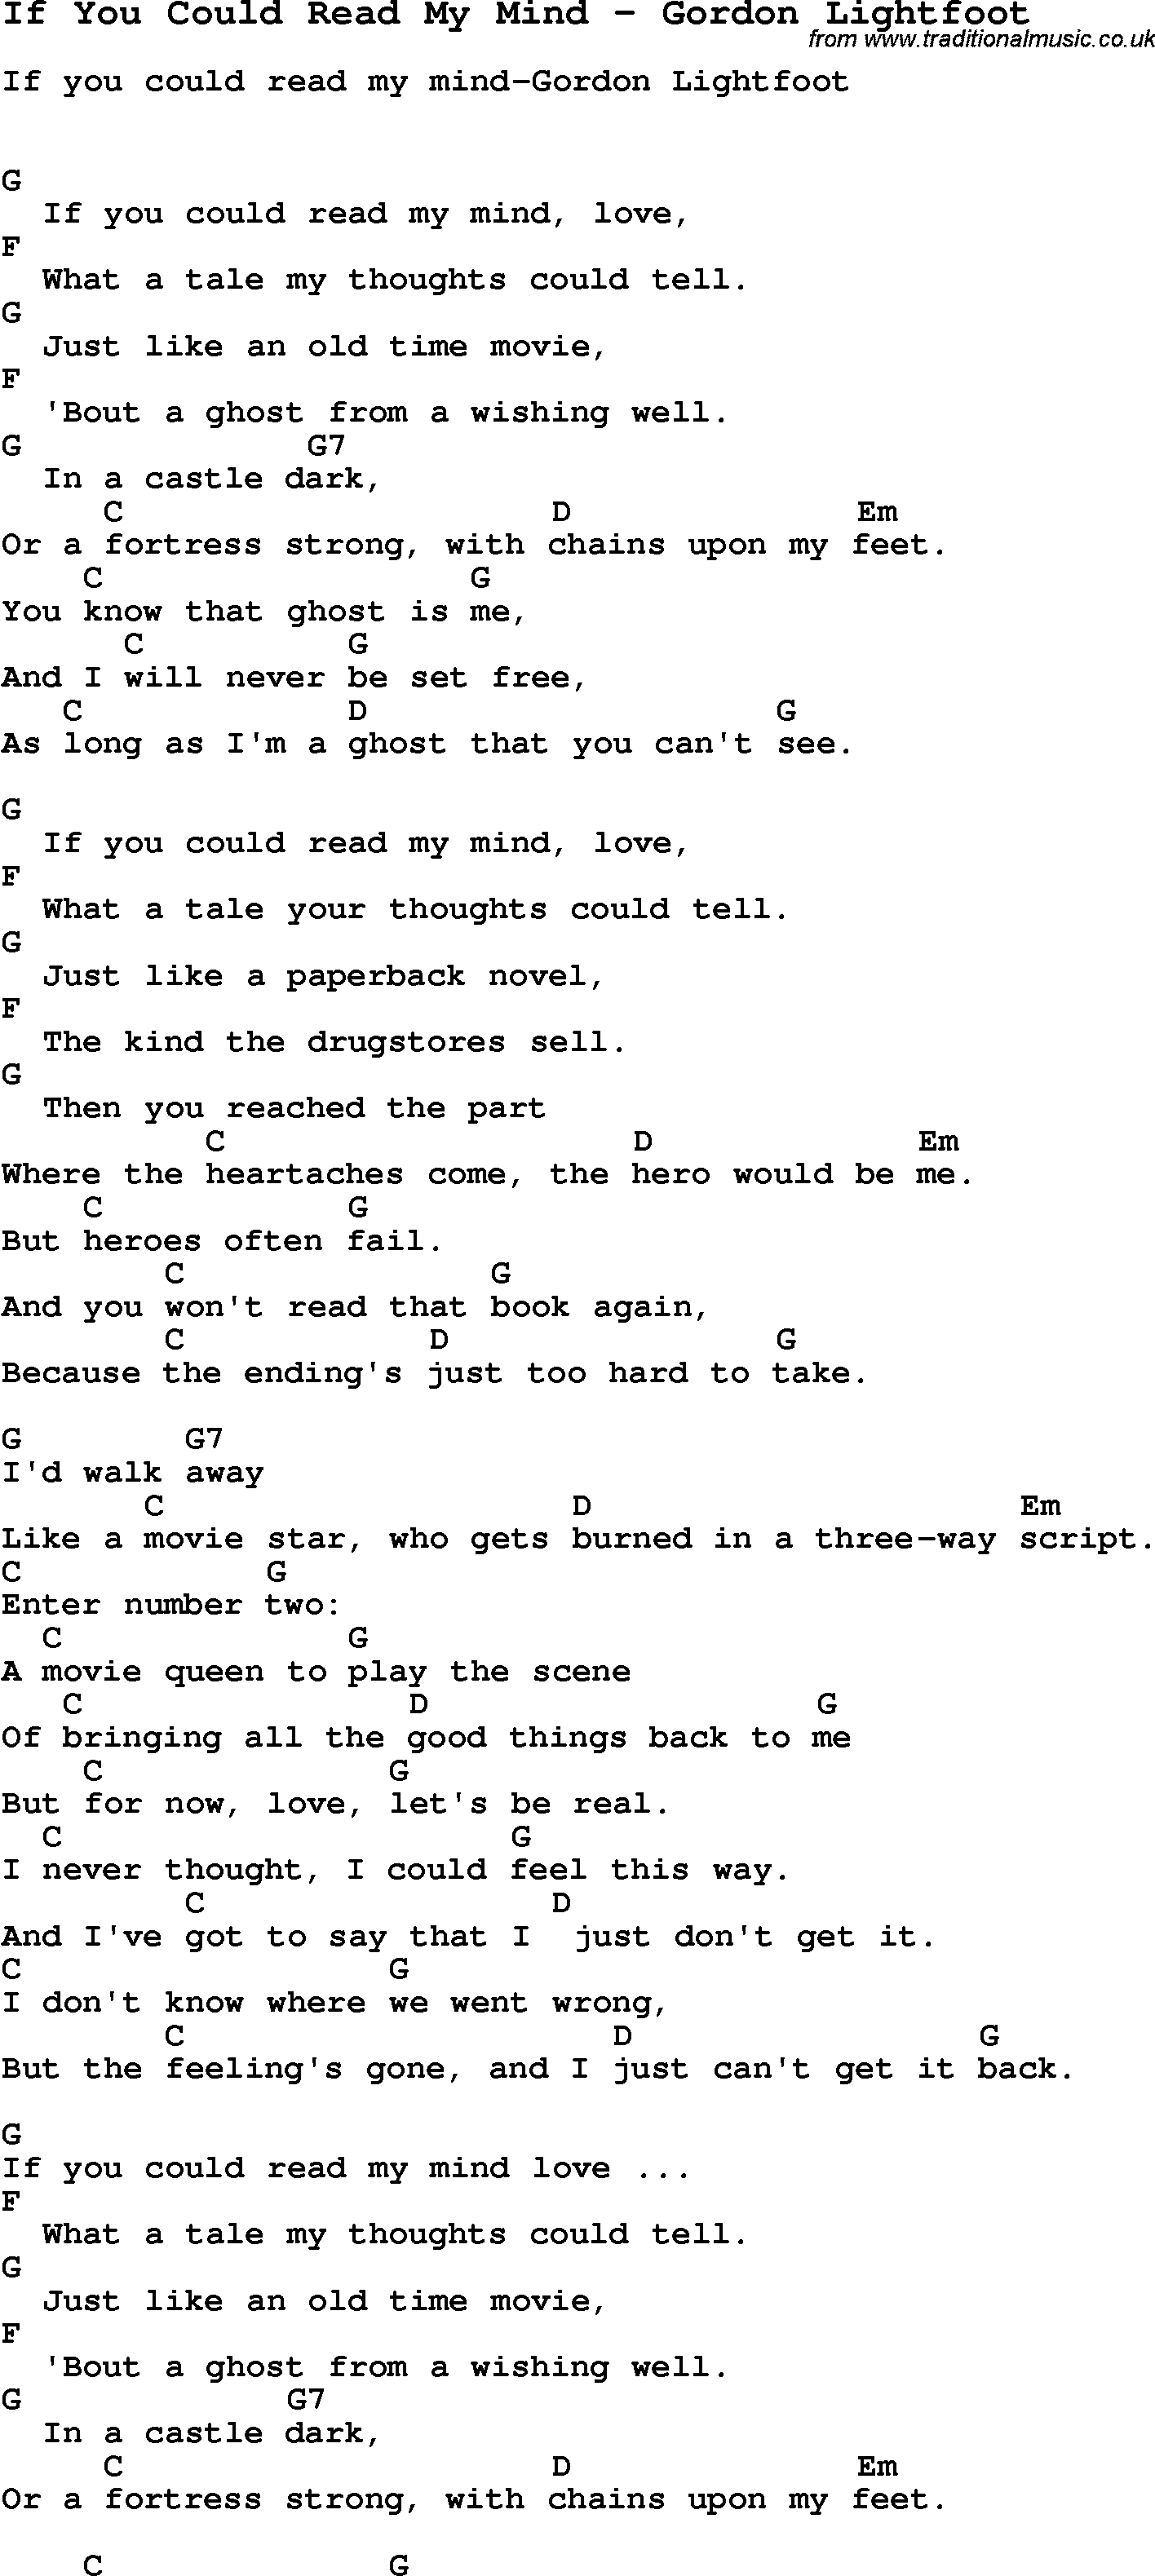 Song If You Could Read My Mind by Gordon Lightfoot, with lyrics for vocal performance and accompaniment chords for Ukulele, Guitar Banjo etc.